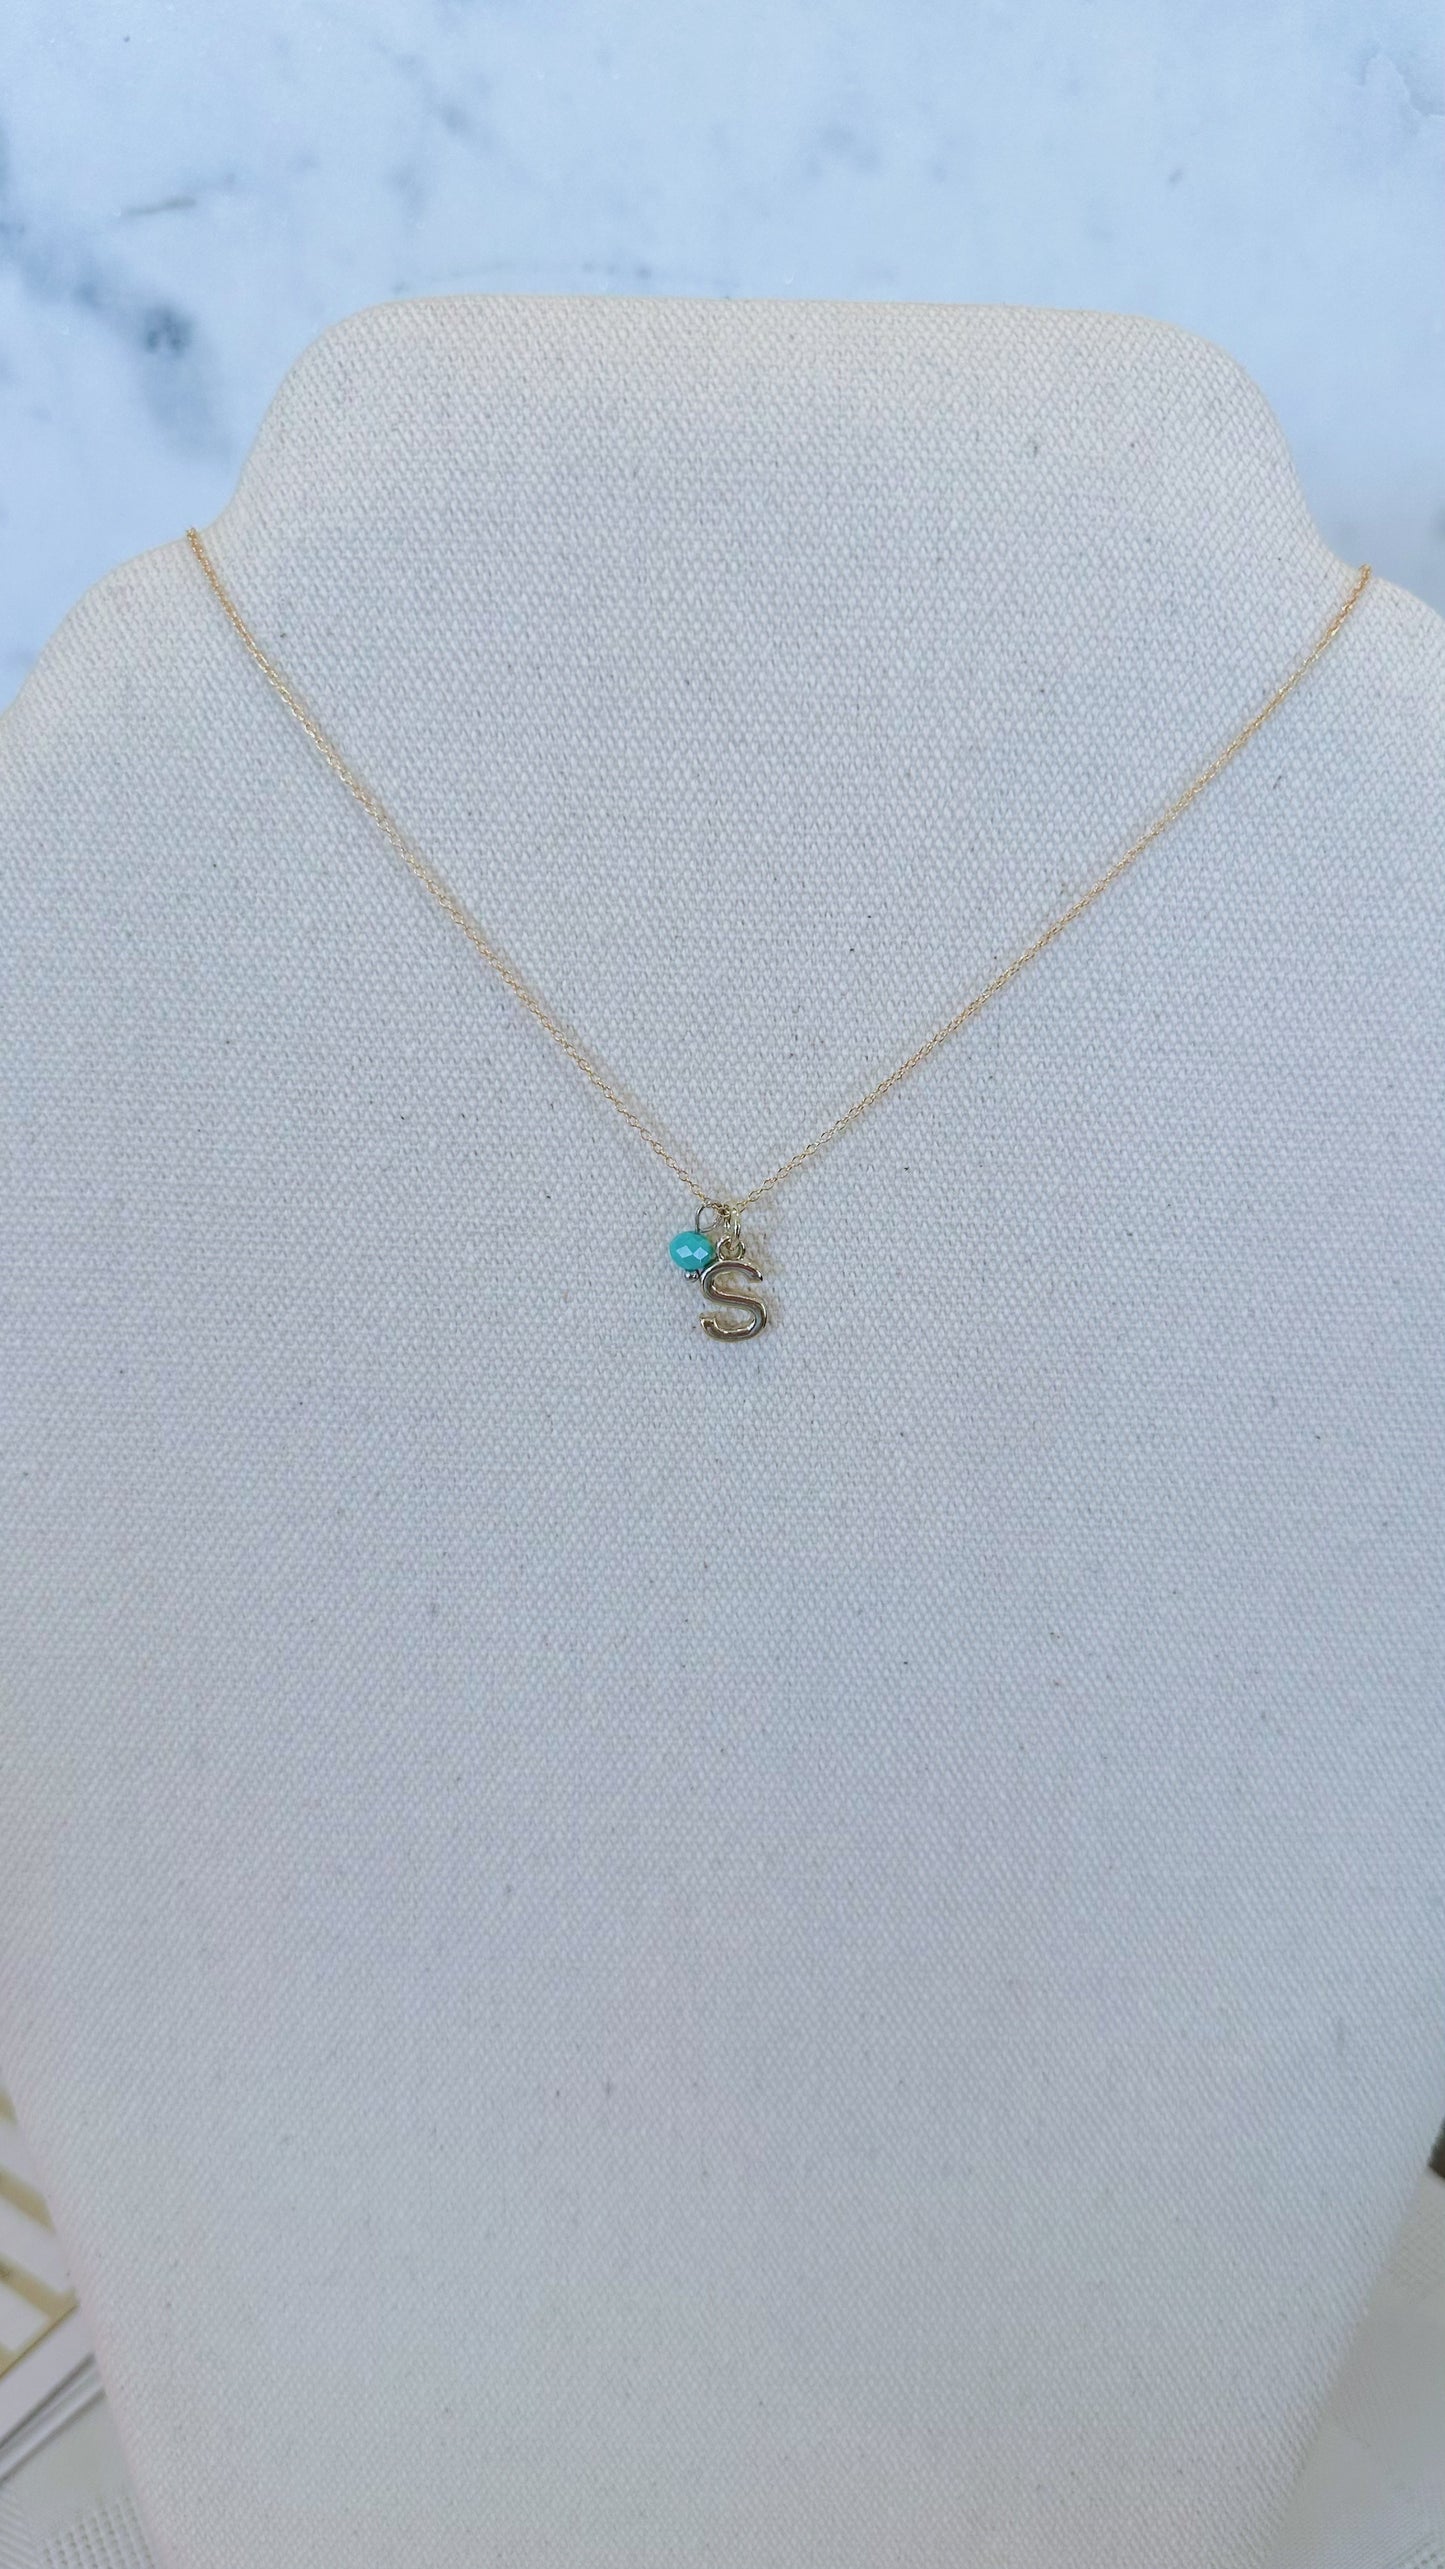 Initial charm necklace with dainty gem